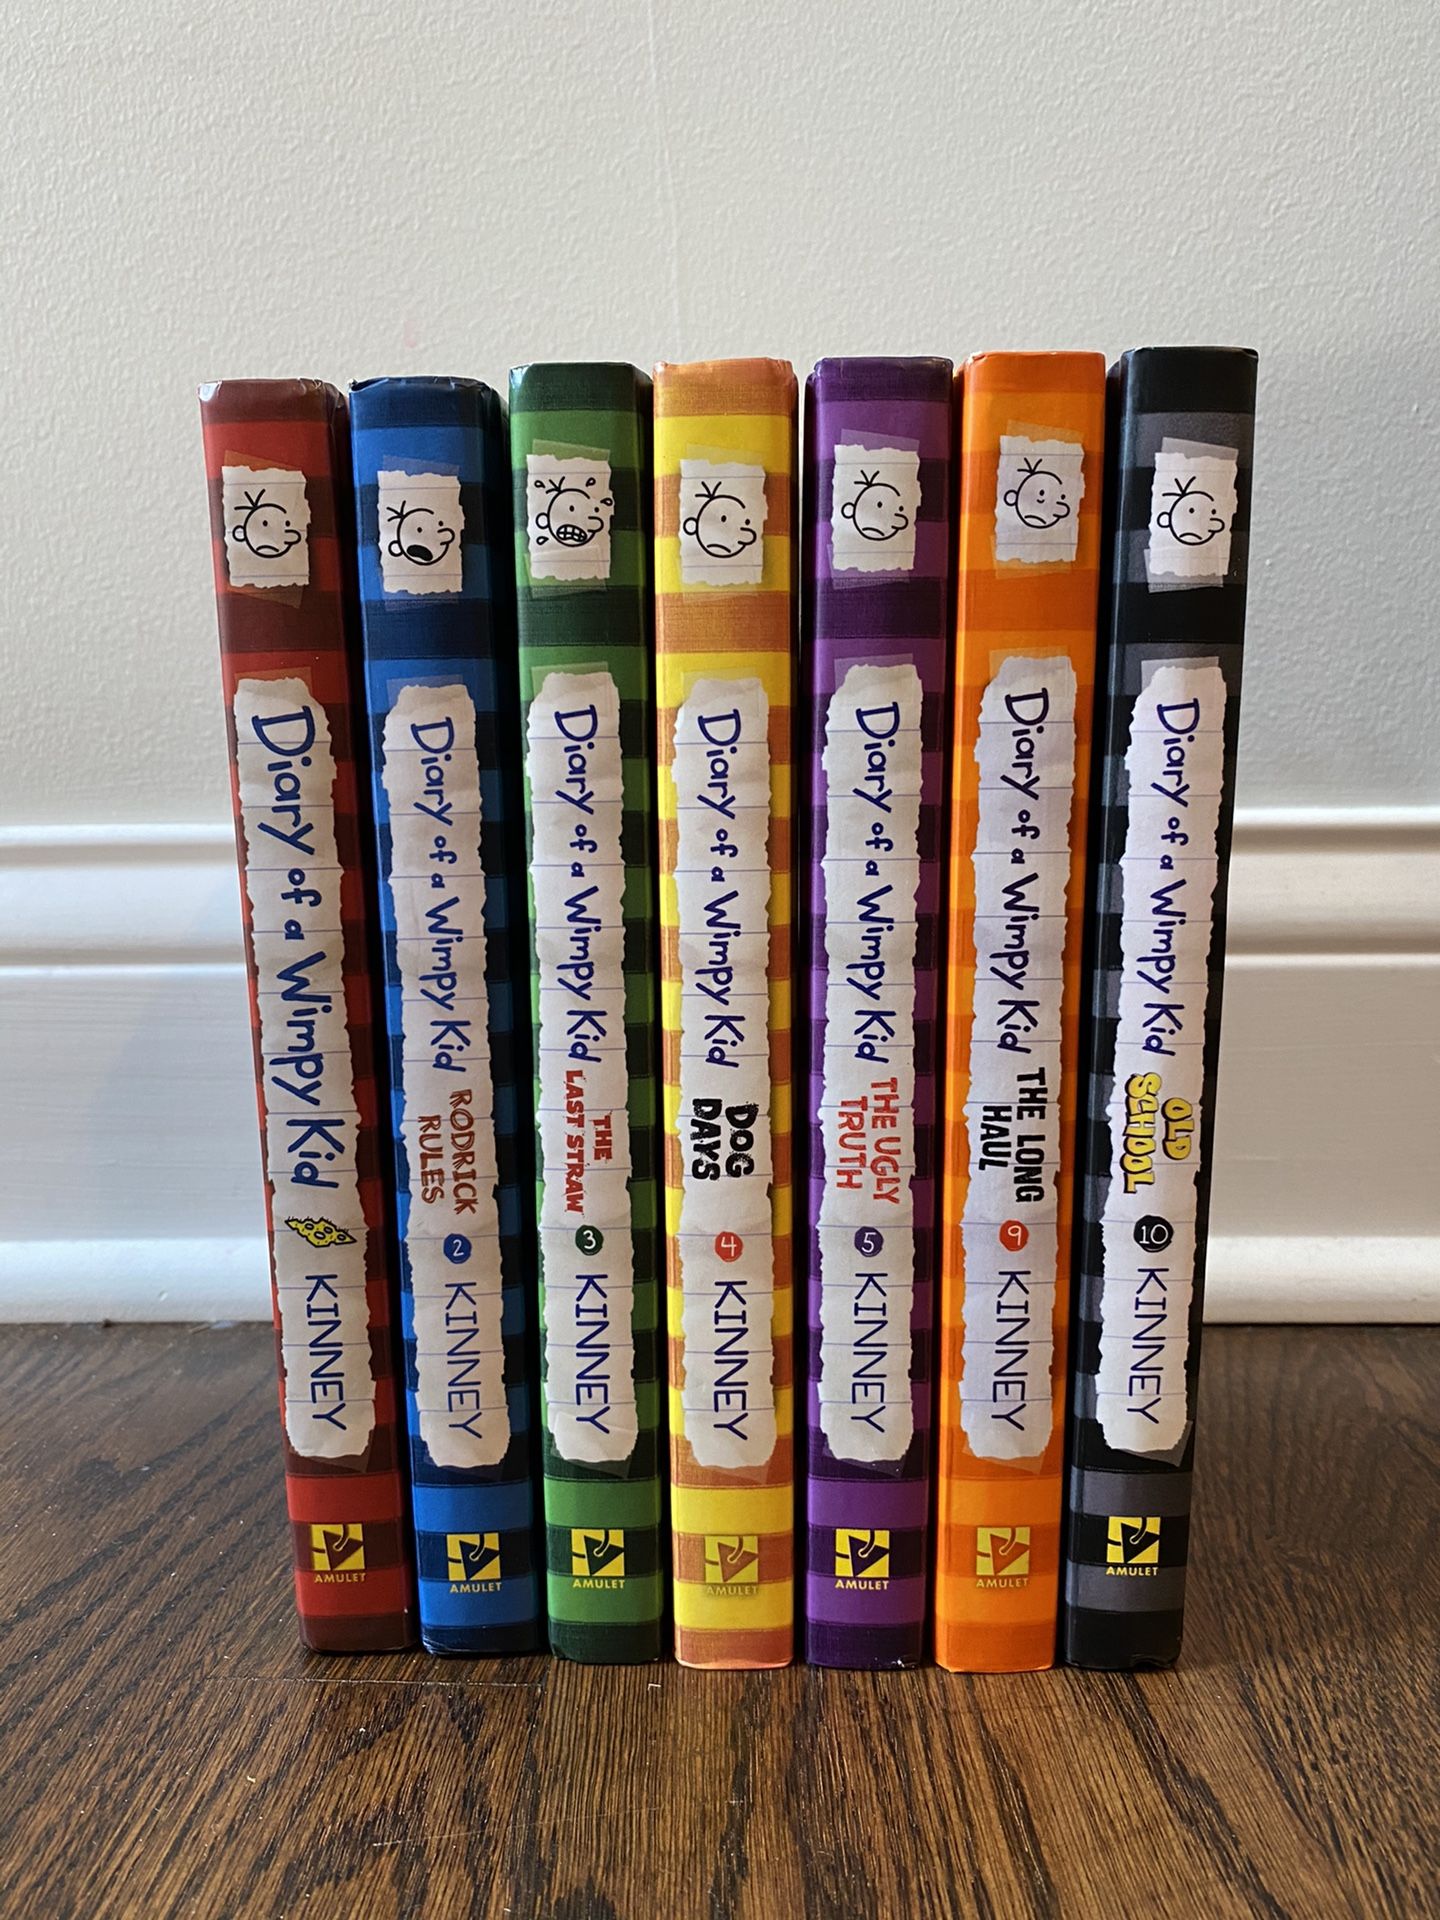 Dairy of a wimpy kid books 1-5, 9&10